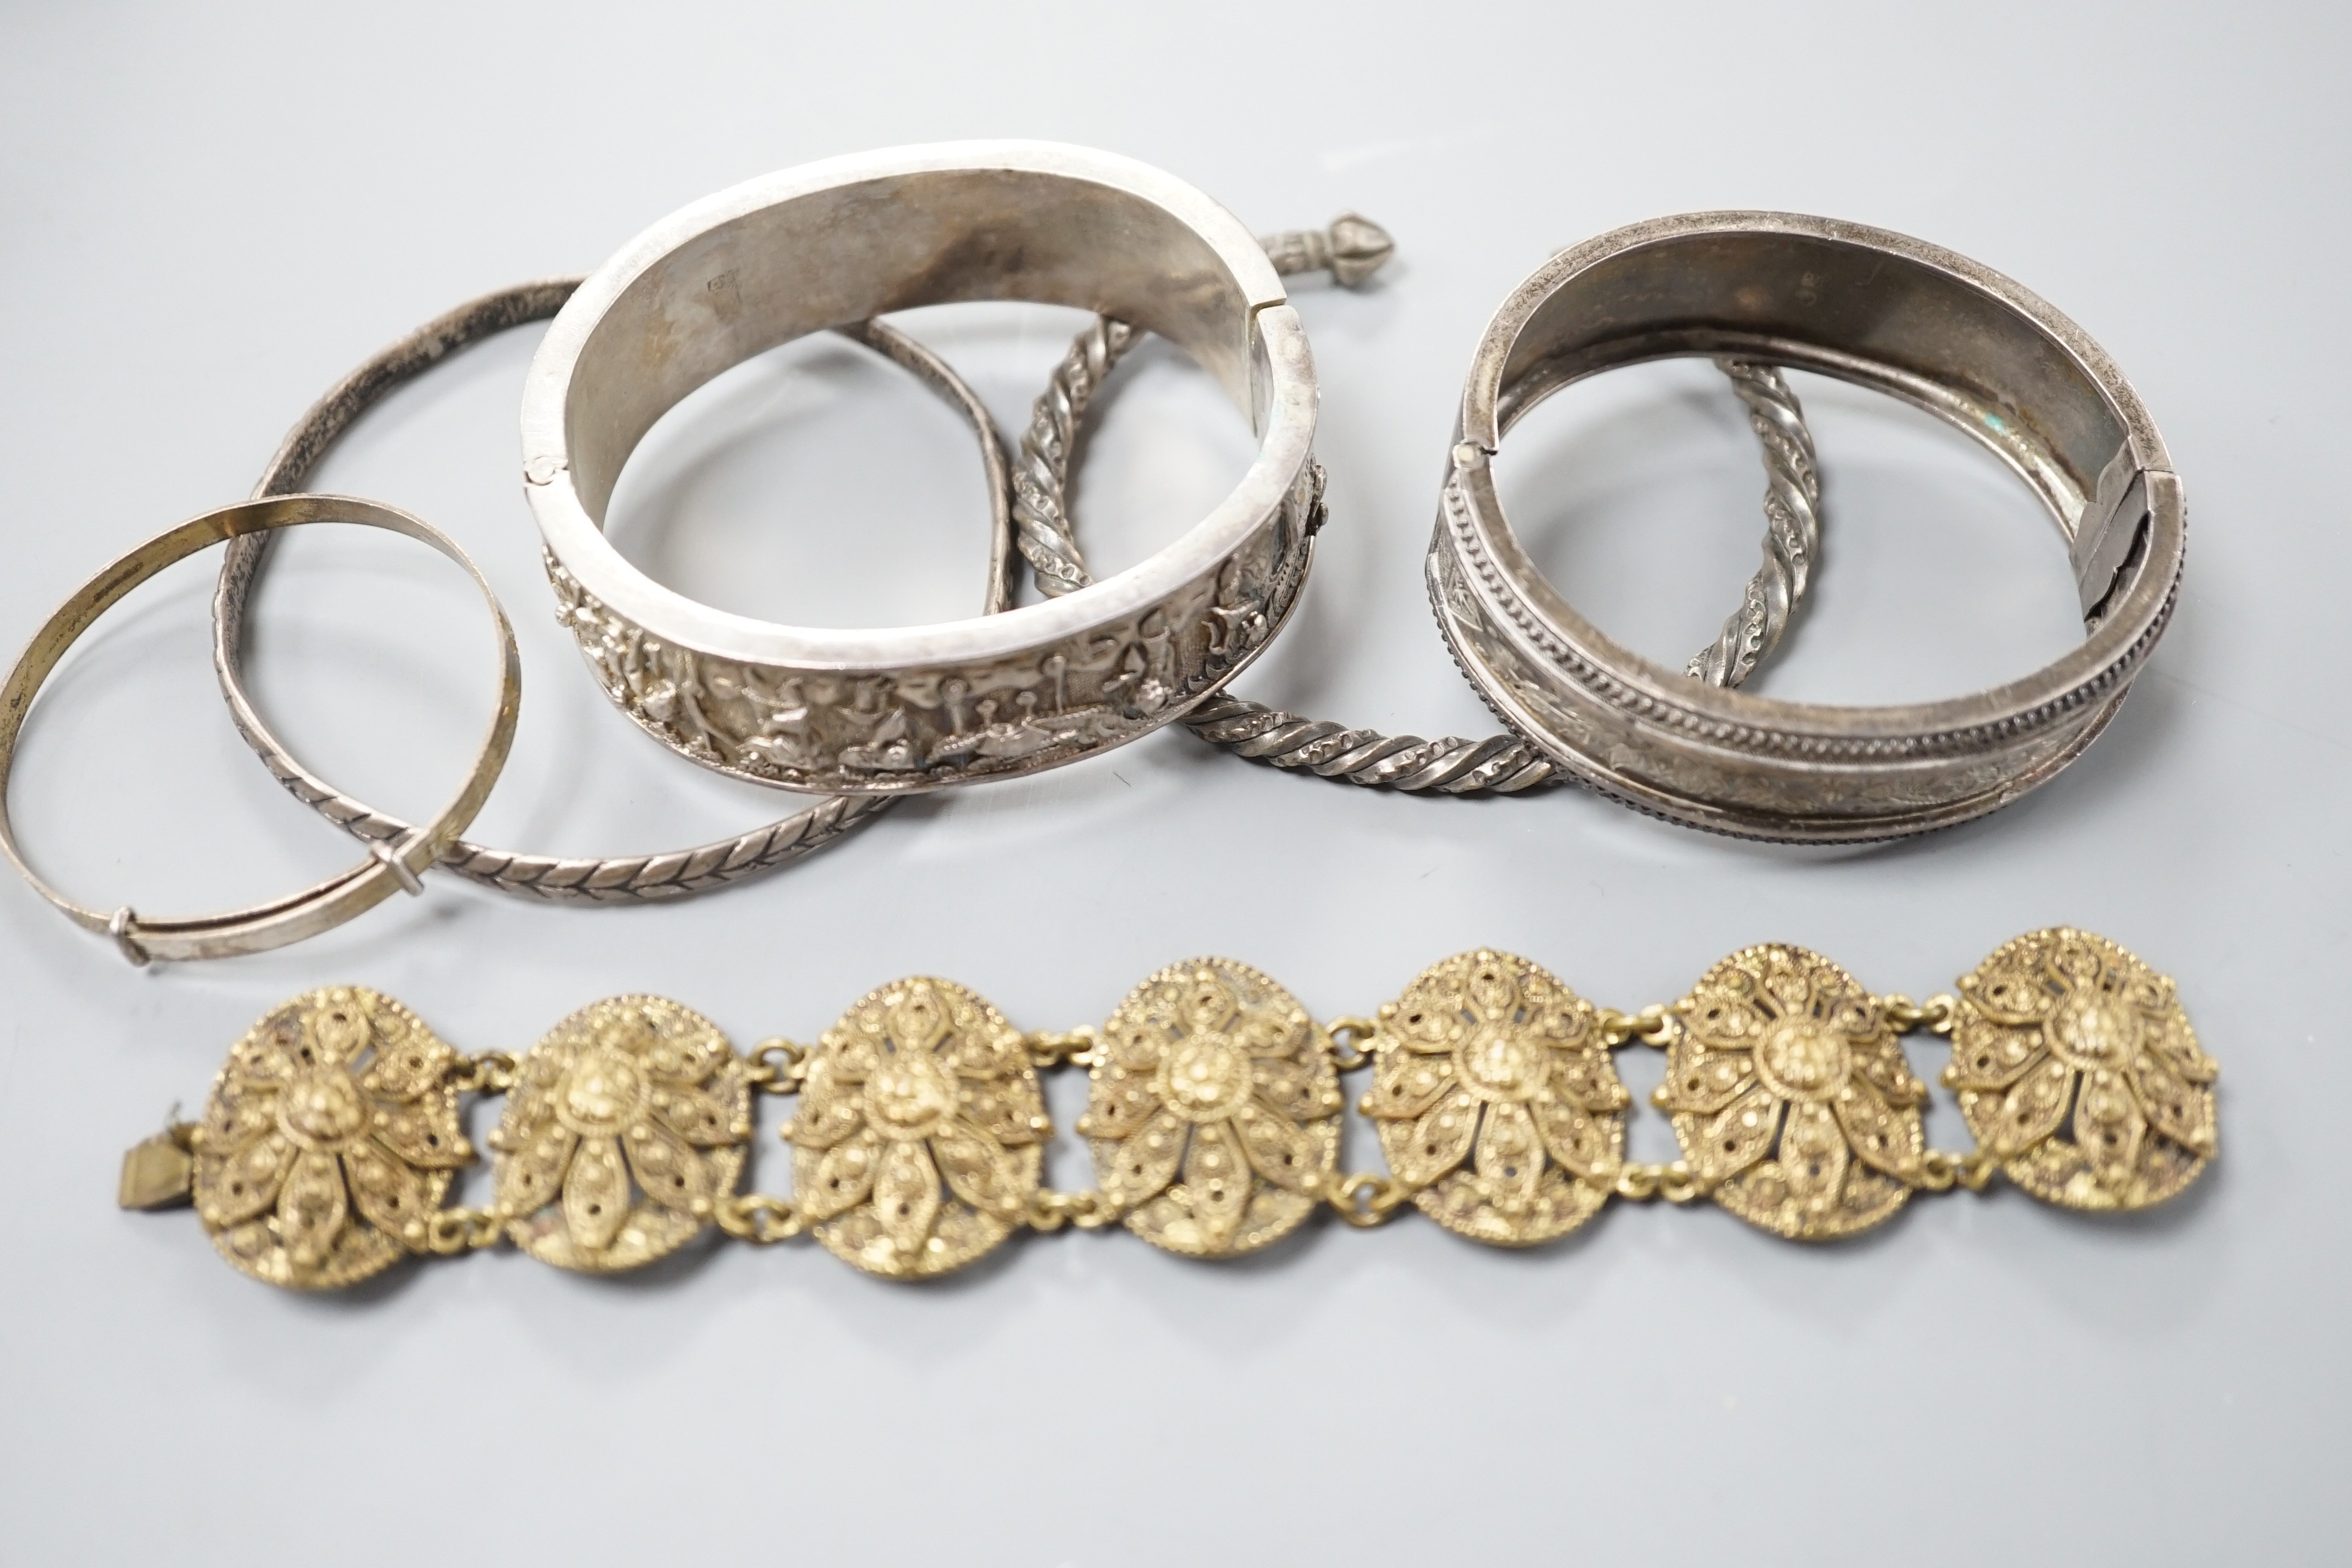 A Chinese white metal hinged bangle and five other items, including an engraved silver hinged bangle.